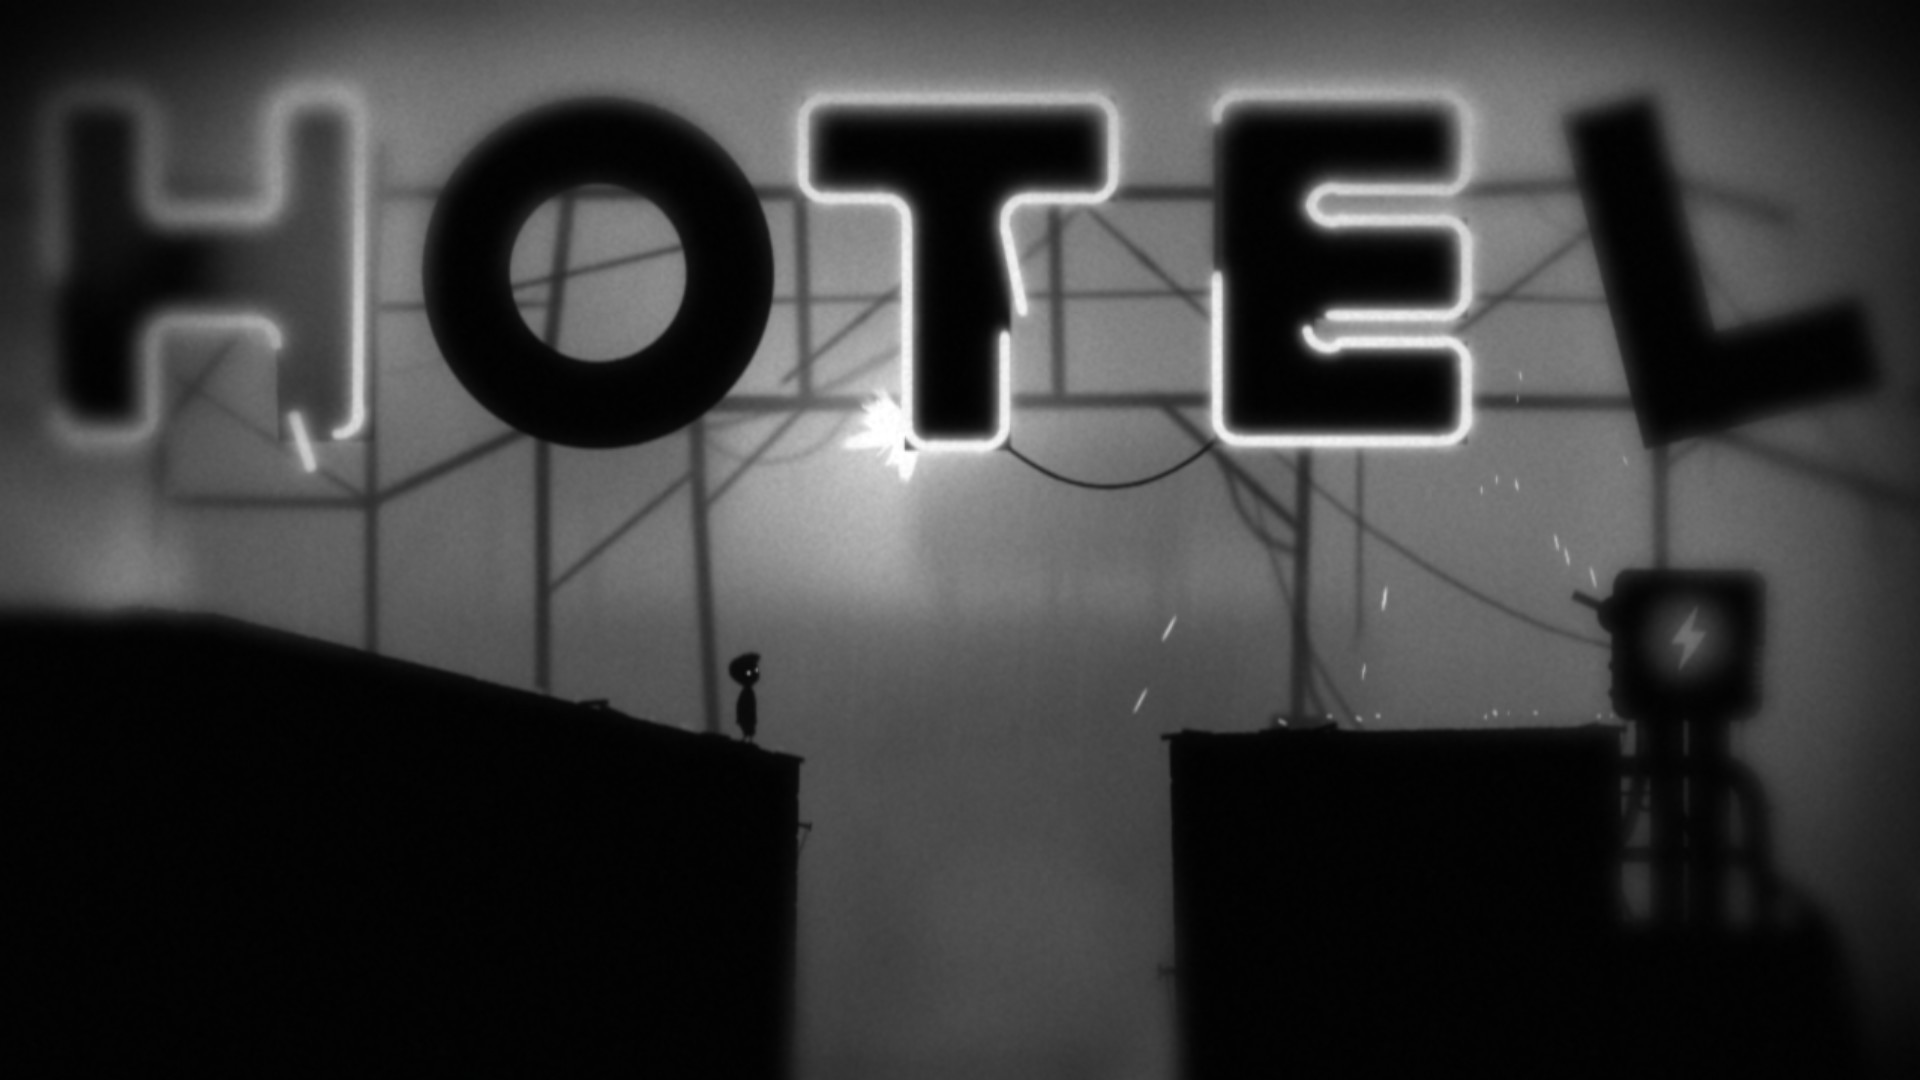 General 1920x1080 Limbo hotel signs monochrome video games